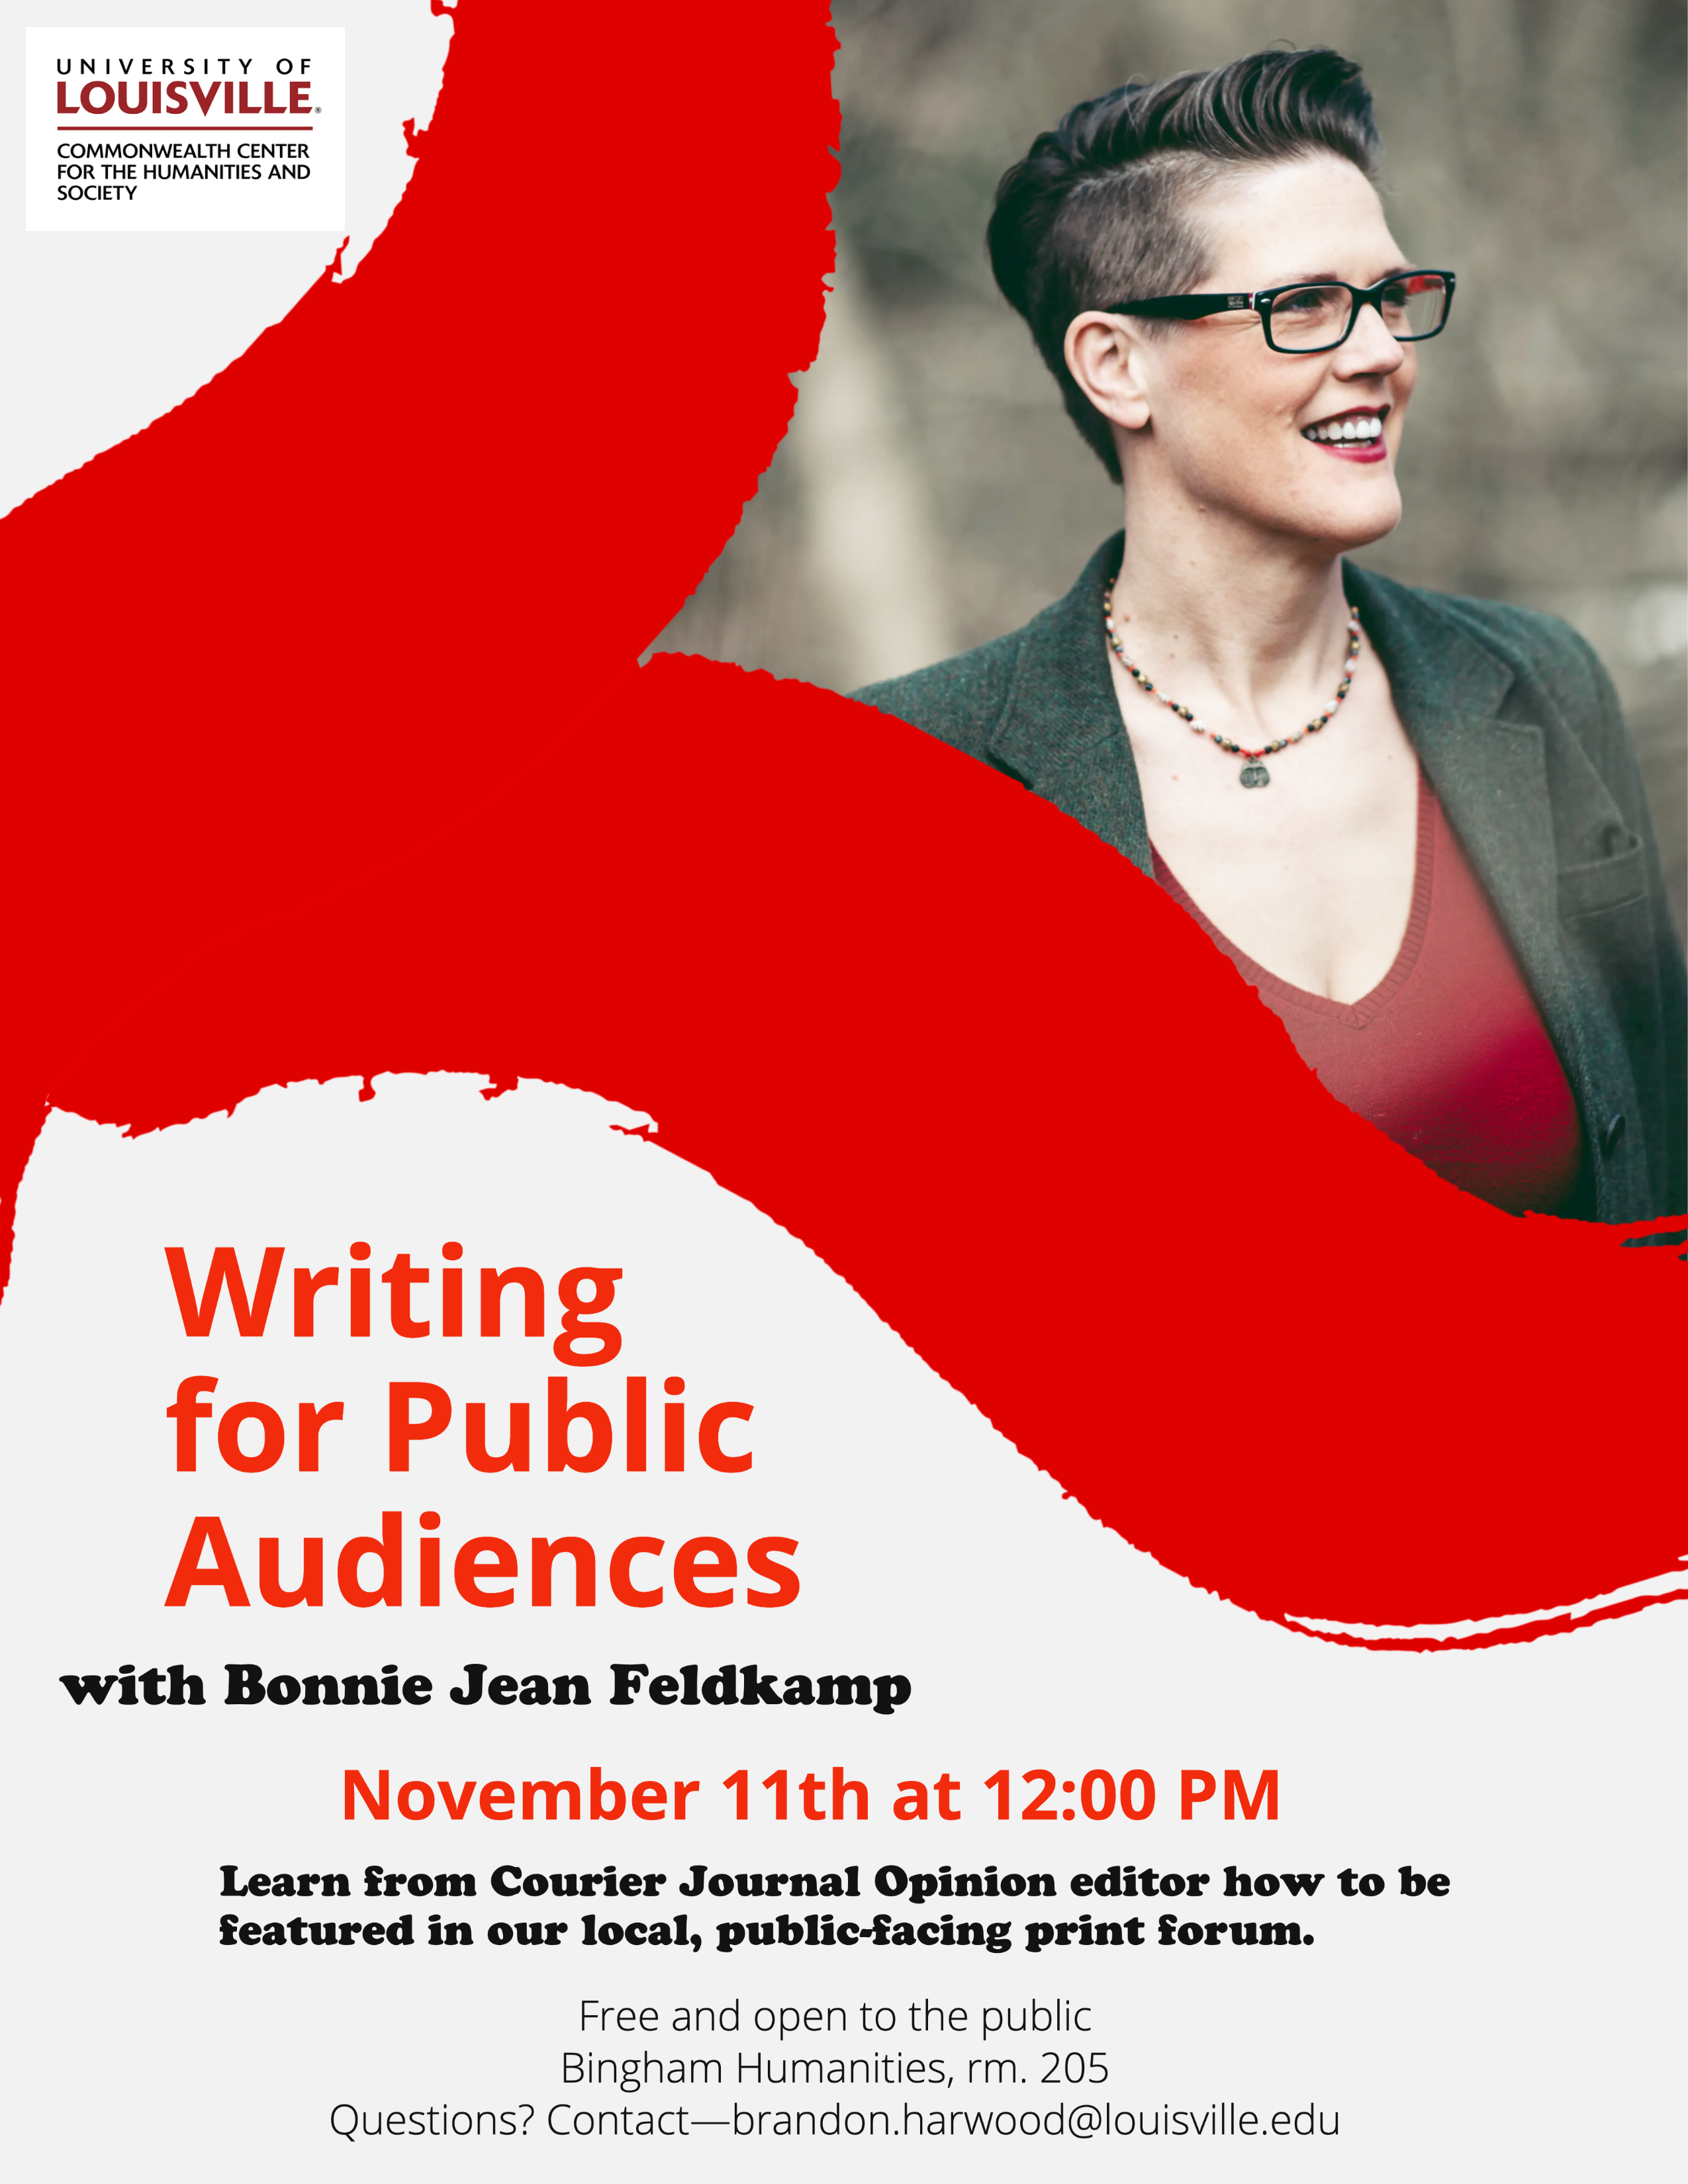 Writing for Public Audiences: Interested in sharing your work with audiences beyond the academy? This workshop will address how scholars can write for the public. Led by Bonnie Jean Feldkamp, Courier Journal Opinion Editor, this workshop will also provide an opportunity to brainstorm how to share your work with the CJ. November 10th 12-1 PM CCHS Conference Room Stevenson Hall, 417 For any questions e-mail brandon.harwood@louisville.edu